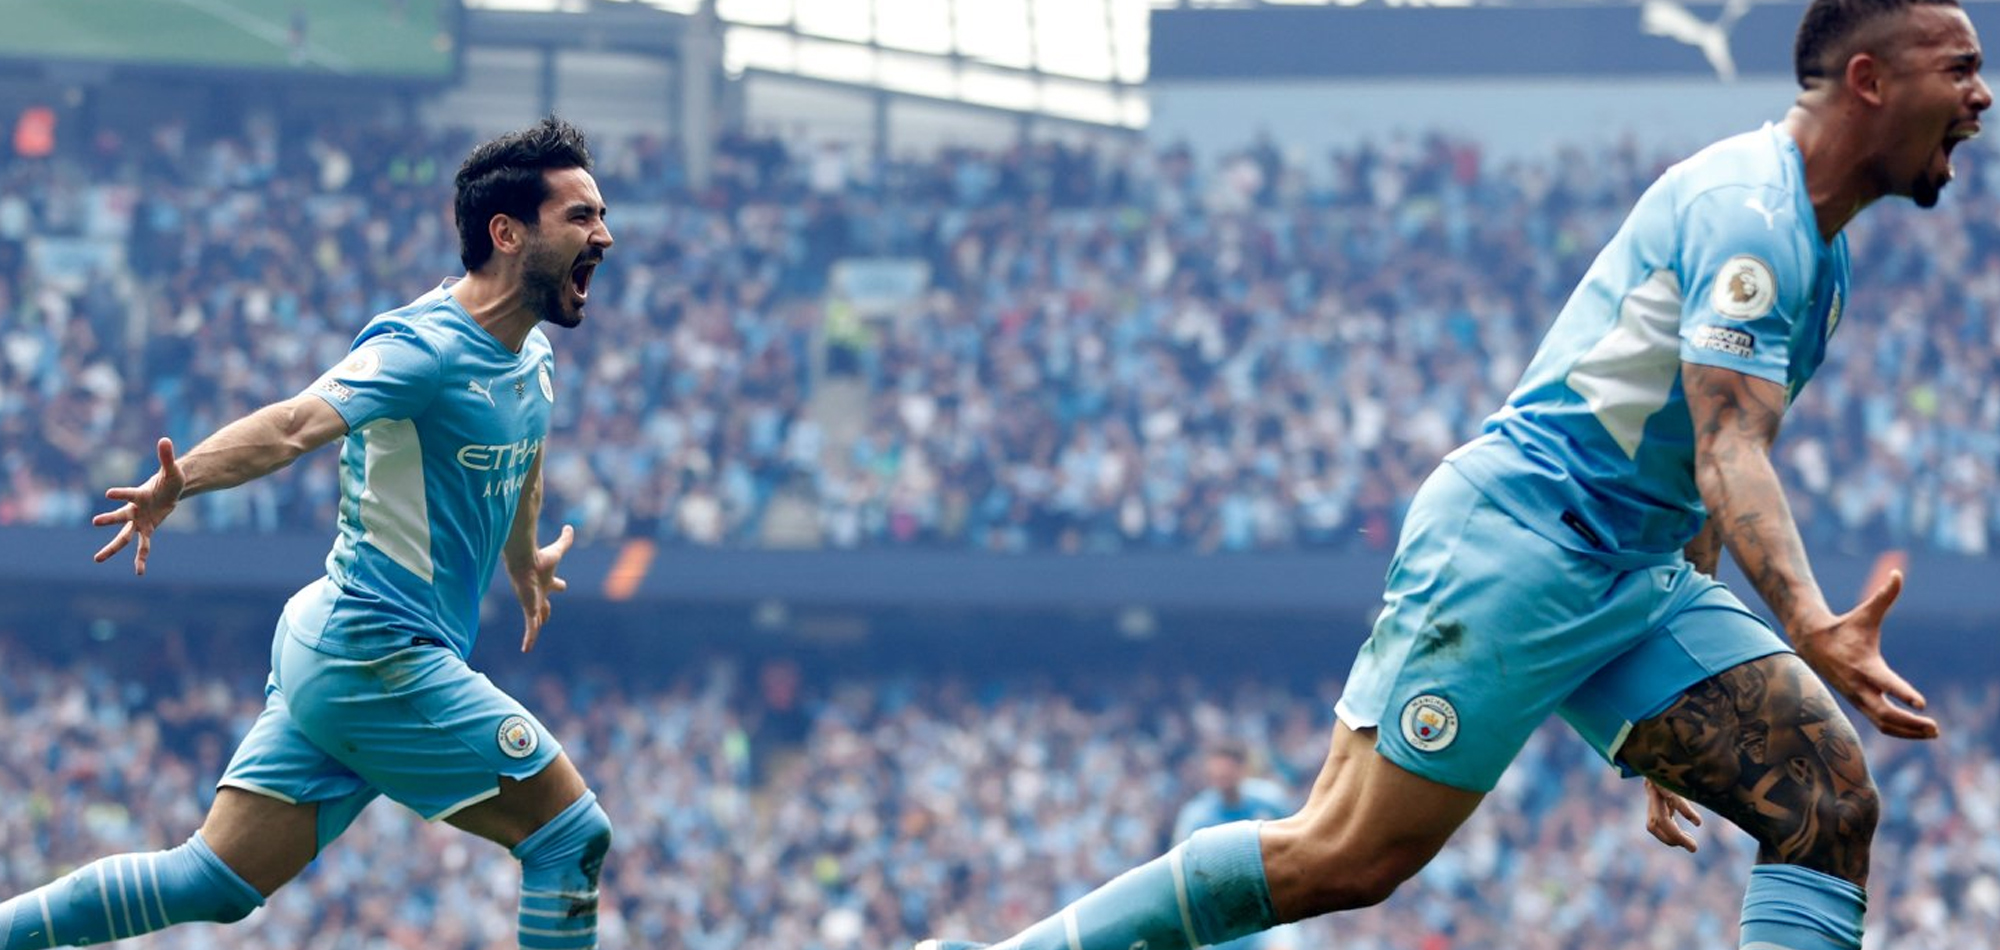 Manchester City Retains Premier League Title, Holds Off Liverpool on Final Day